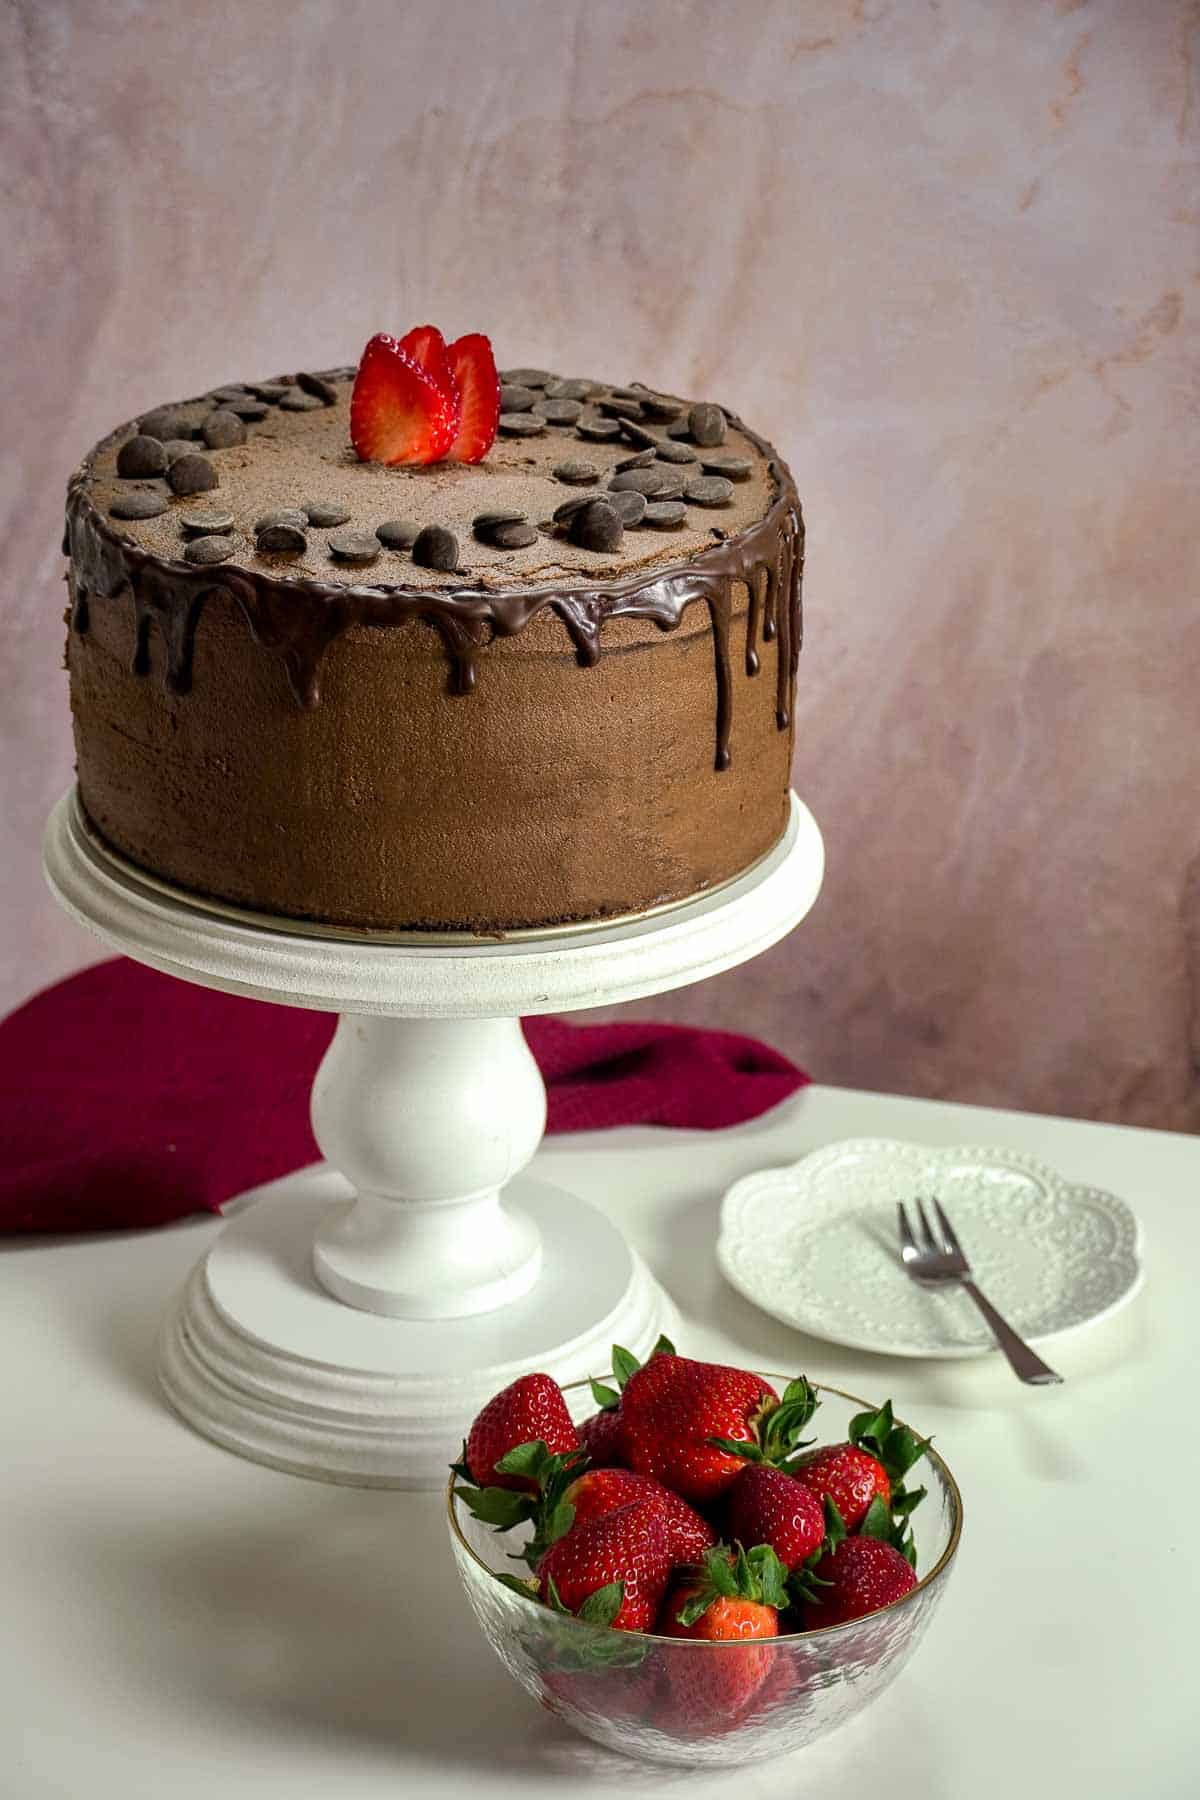 A chocolate cake with a bowl of strawberries next to it.